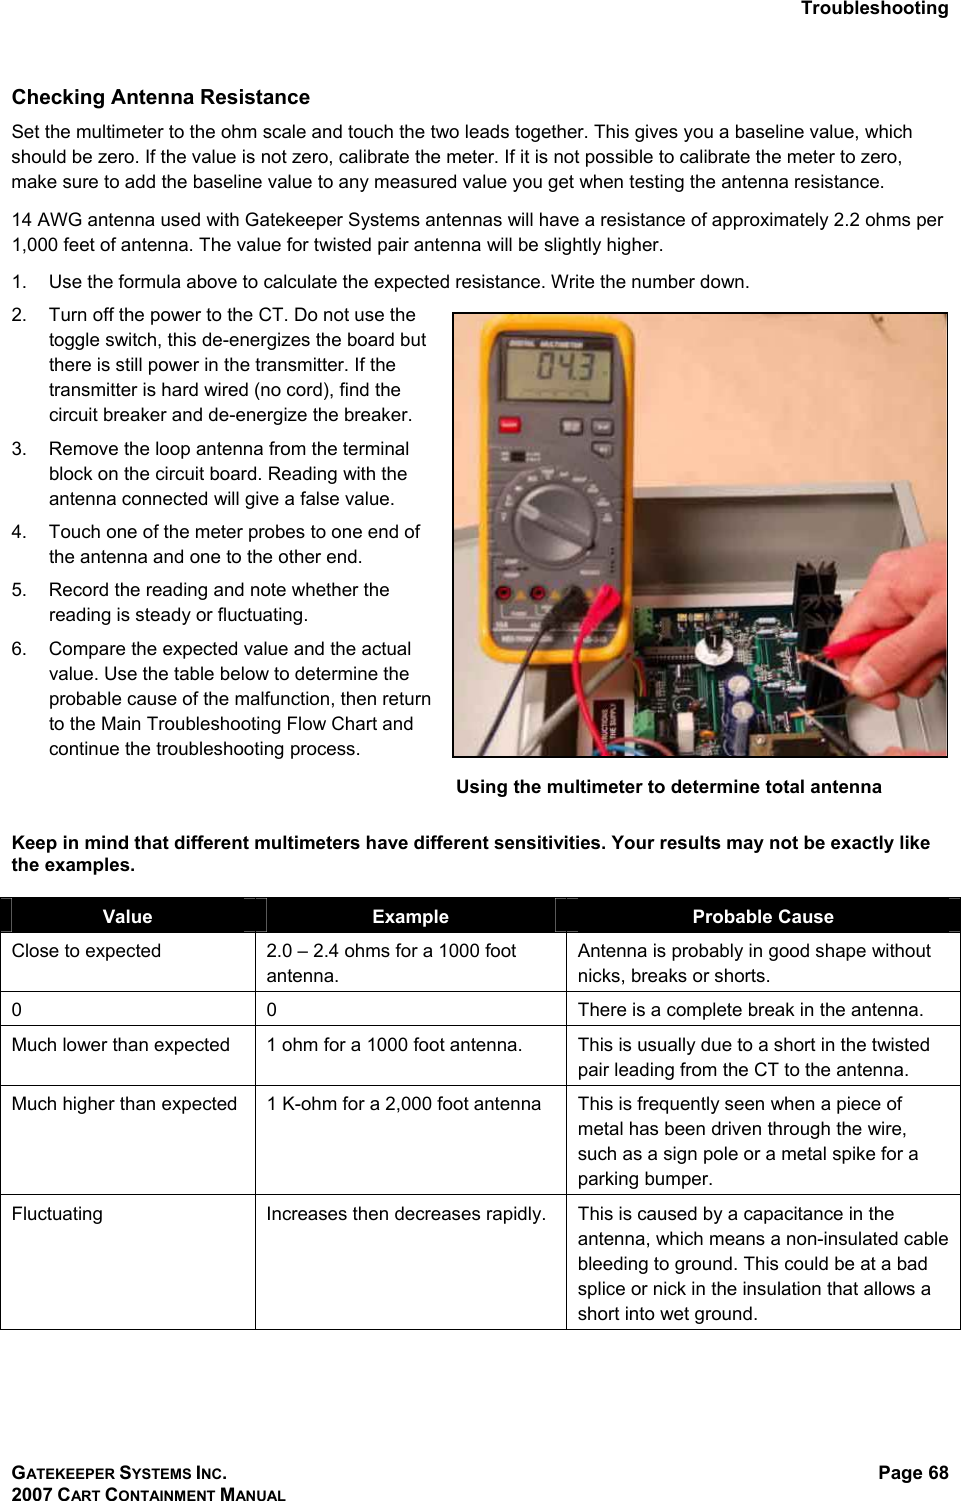 Troubleshooting GATEKEEPER SYSTEMS INC. 2007 CART CONTAINMENT MANUAL Page 68  Using the multimeter to determine total antenna Checking Antenna Resistance Set the multimeter to the ohm scale and touch the two leads together. This gives you a baseline value, which should be zero. If the value is not zero, calibrate the meter. If it is not possible to calibrate the meter to zero, make sure to add the baseline value to any measured value you get when testing the antenna resistance.  14 AWG antenna used with Gatekeeper Systems antennas will have a resistance of approximately 2.2 ohms per 1,000 feet of antenna. The value for twisted pair antenna will be slightly higher.  1.  Use the formula above to calculate the expected resistance. Write the number down. 2.  Turn off the power to the CT. Do not use the toggle switch, this de-energizes the board but there is still power in the transmitter. If the transmitter is hard wired (no cord), find the circuit breaker and de-energize the breaker. 3.  Remove the loop antenna from the terminal block on the circuit board. Reading with the antenna connected will give a false value.  4.  Touch one of the meter probes to one end of the antenna and one to the other end.  5.  Record the reading and note whether the reading is steady or fluctuating. 6.  Compare the expected value and the actual value. Use the table below to determine the probable cause of the malfunction, then return to the Main Troubleshooting Flow Chart and continue the troubleshooting process.       Keep in mind that different multimeters have different sensitivities. Your results may not be exactly like the examples.  Value  Example  Probable Cause Close to expected   2.0 – 2.4 ohms for a 1000 foot antenna. Antenna is probably in good shape without nicks, breaks or shorts. 0  0  There is a complete break in the antenna.  Much lower than expected  1 ohm for a 1000 foot antenna.  This is usually due to a short in the twisted pair leading from the CT to the antenna.  Much higher than expected  1 K-ohm for a 2,000 foot antenna  This is frequently seen when a piece of metal has been driven through the wire, such as a sign pole or a metal spike for a parking bumper. Fluctuating  Increases then decreases rapidly.  This is caused by a capacitance in the antenna, which means a non-insulated cable bleeding to ground. This could be at a bad splice or nick in the insulation that allows a short into wet ground.   